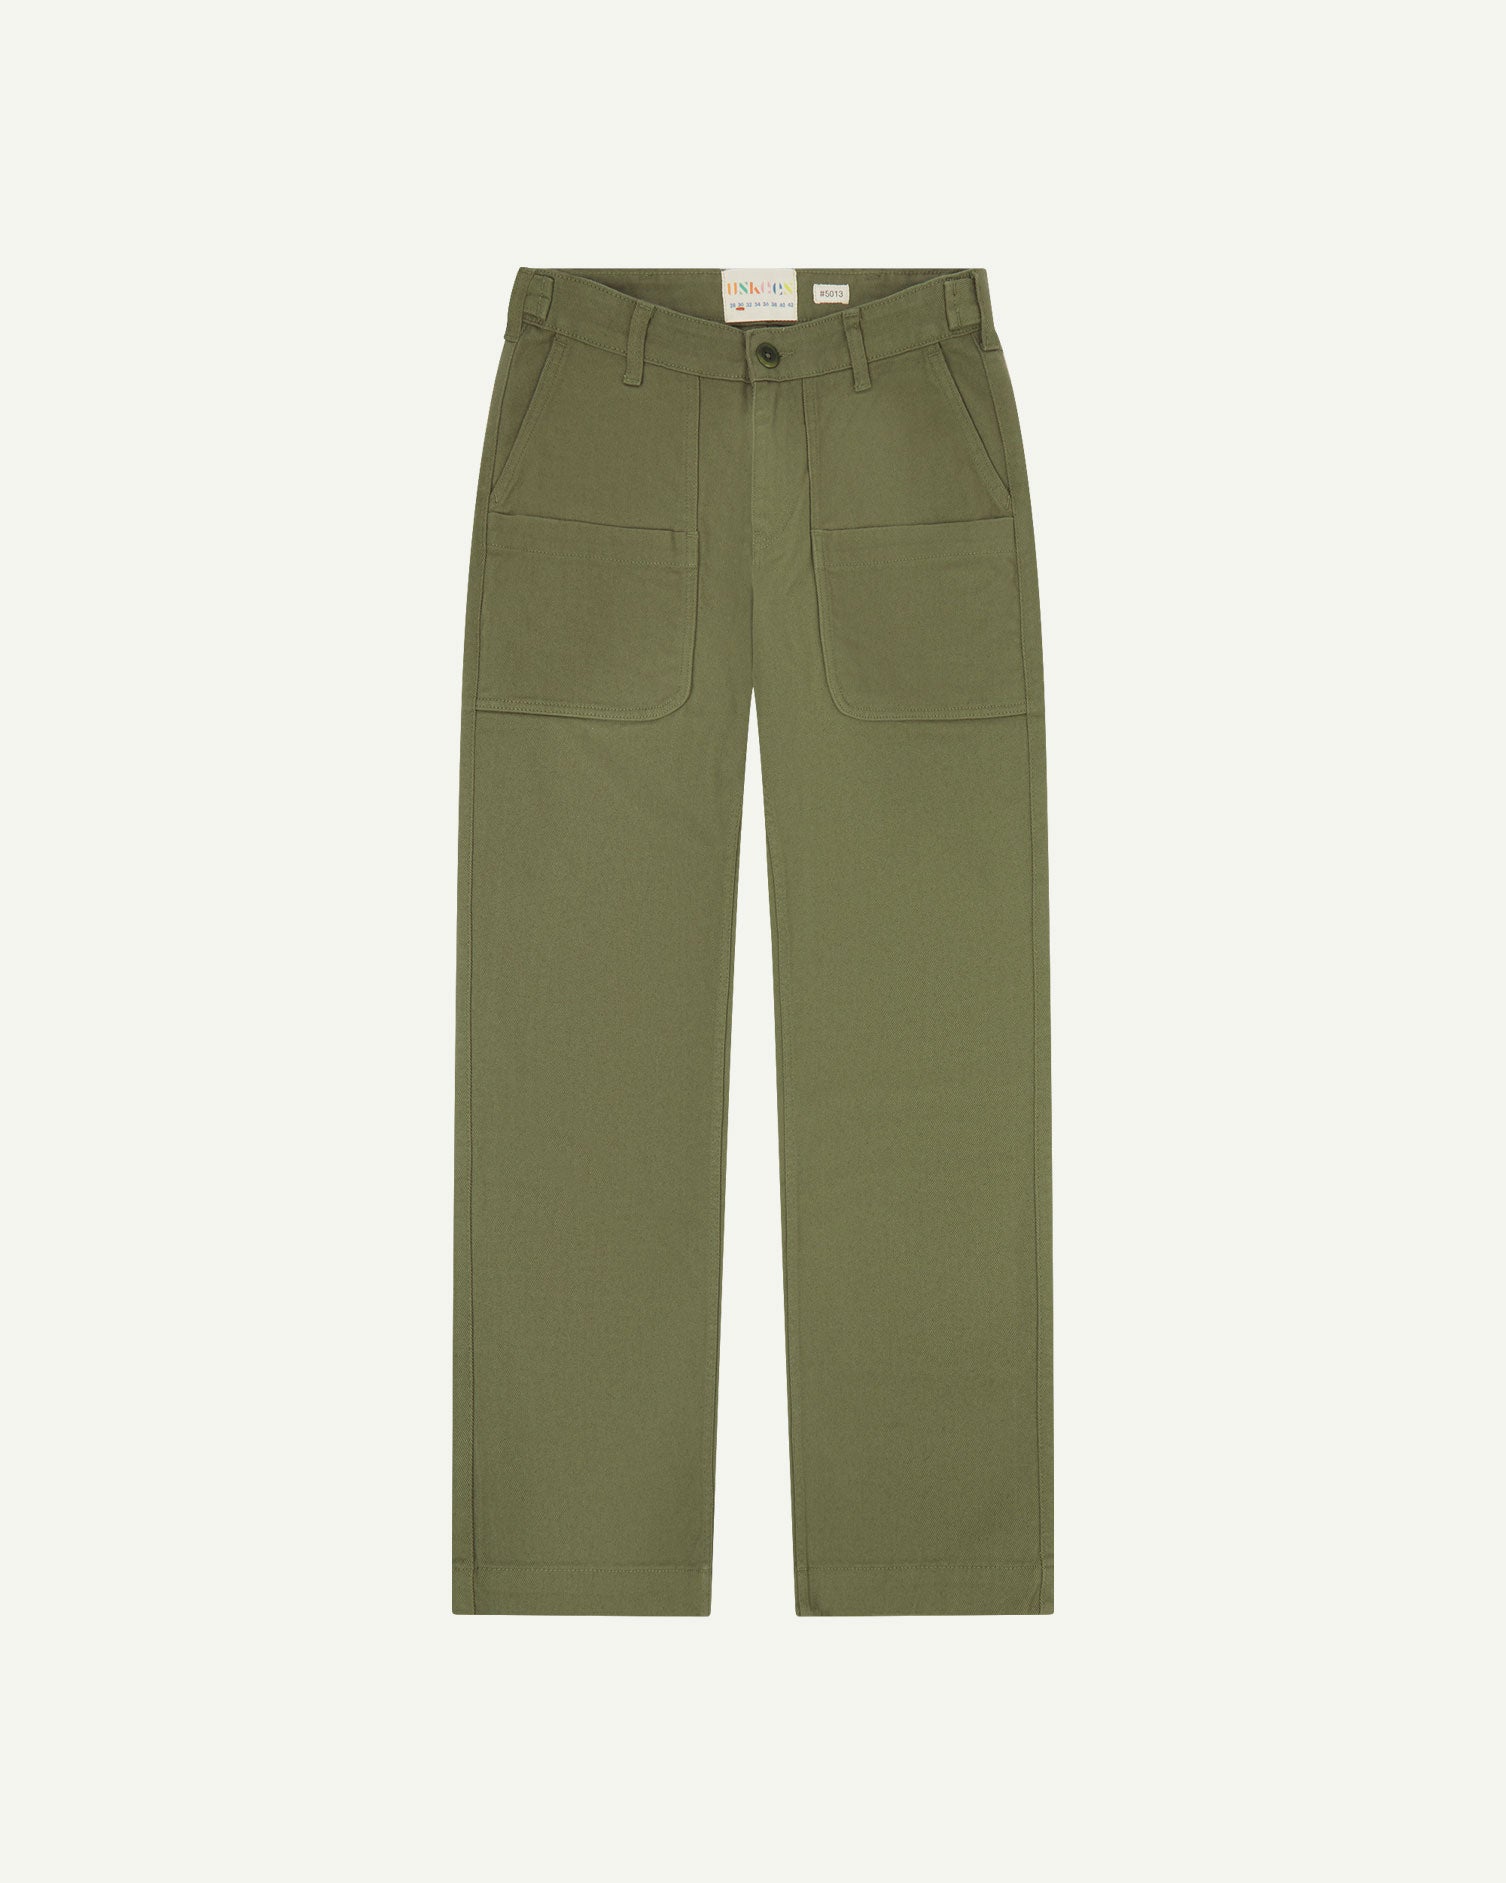 Front flat view of 5013 Uskees drill straight leg pants in moss green, with focus on front pockets, layered pockets, belt loops and Uskees branding label.